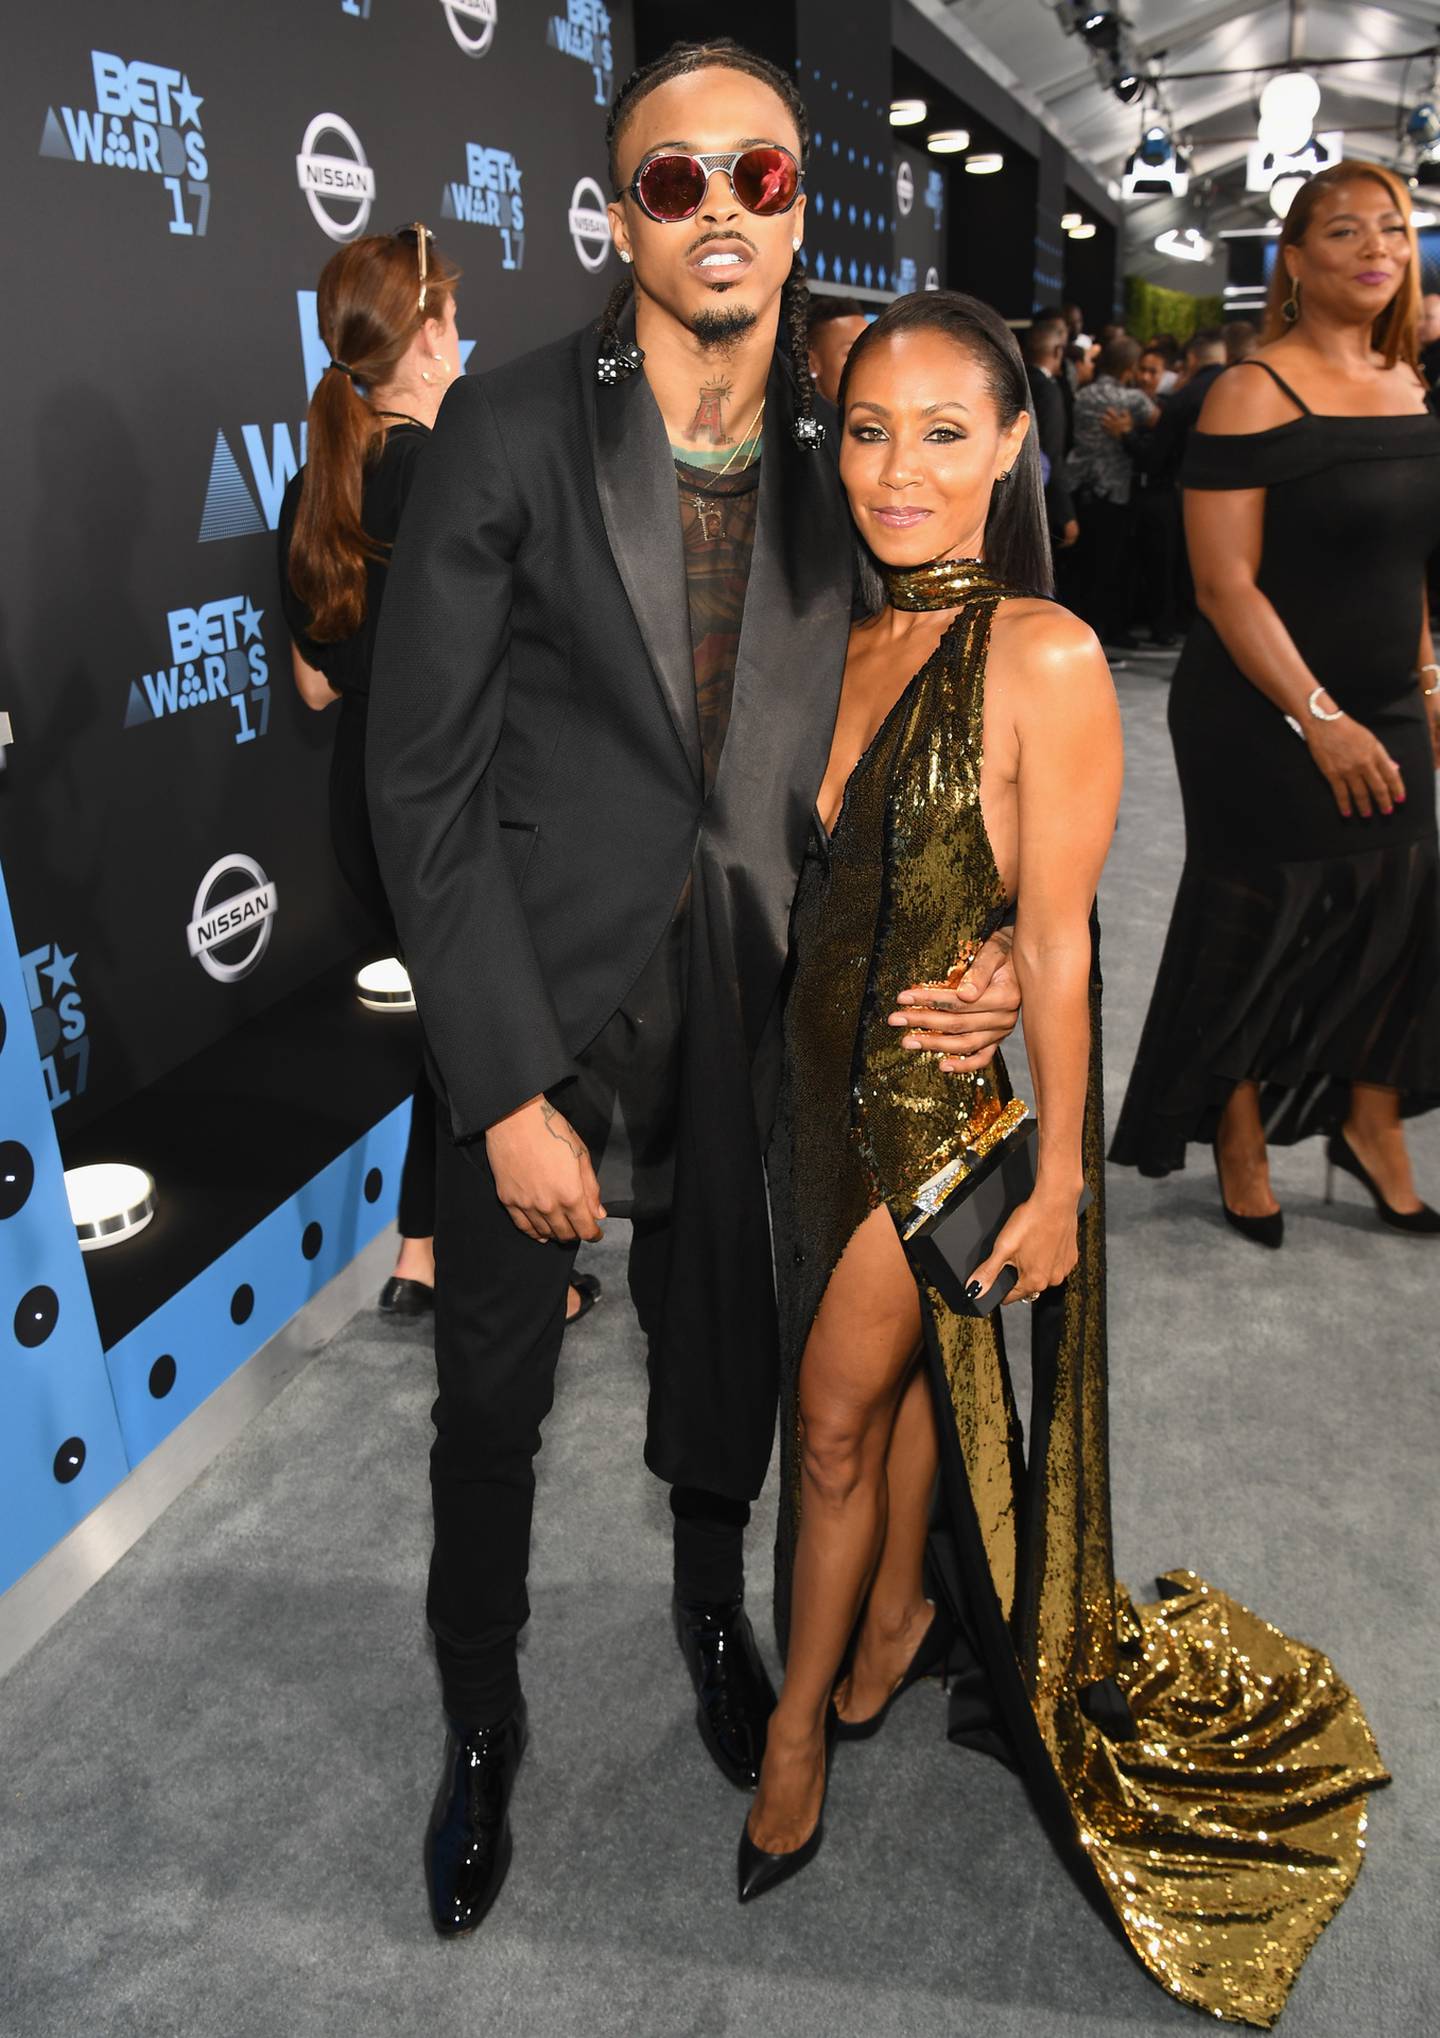 August Alsina and Jada Pinkett Smith at the 2017 BET Awards during their affair. Photo / Getty Images